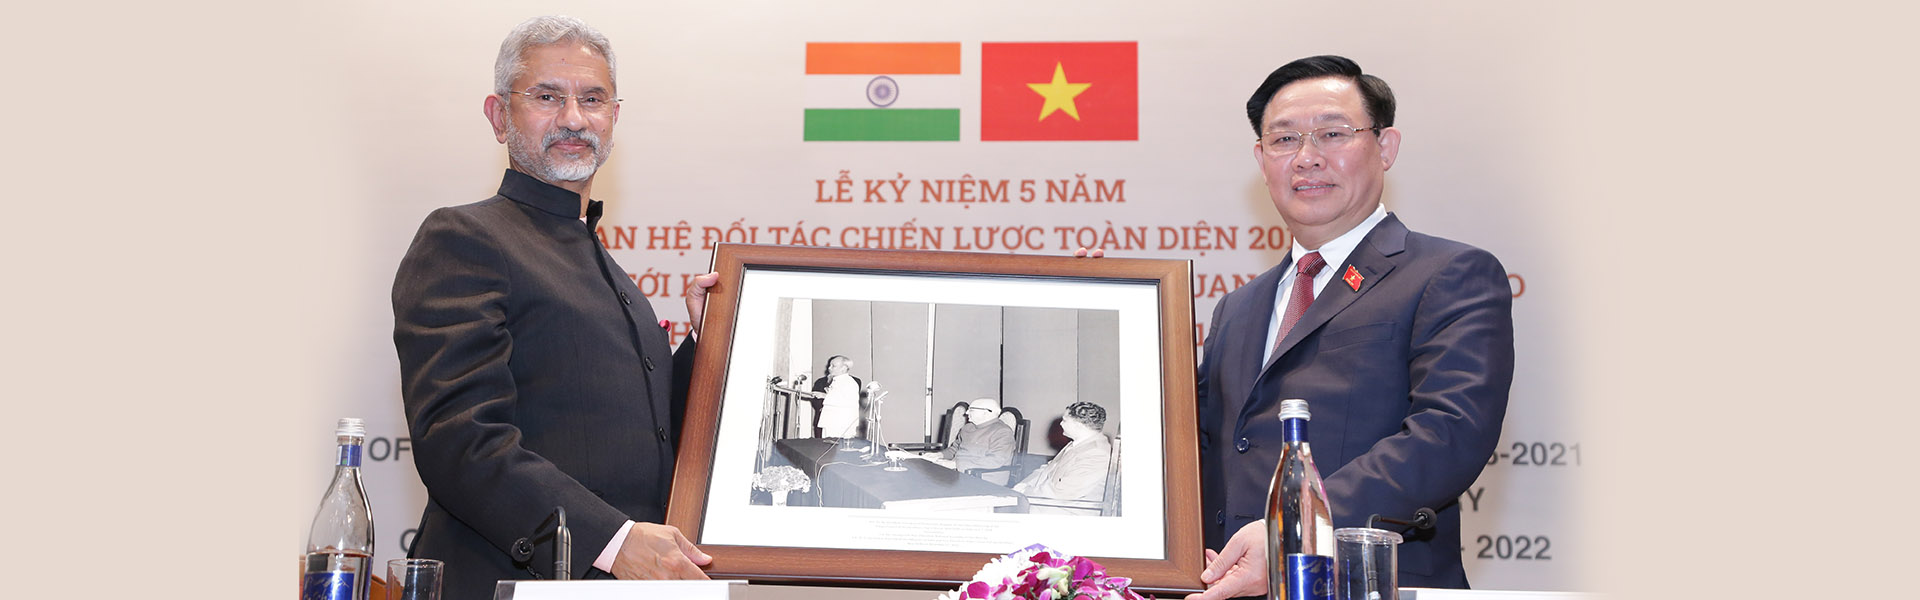 Dr. S. Jaishankar, External Affairs Minister, Government of India, presented a photograph of Former President of Viet Nam Ho Chi Minh addressing ICWA on 7 February 1958 to H.E. Vuong Dinh Hue, President, National Assembly of Viet Nam, 17 December 2021.